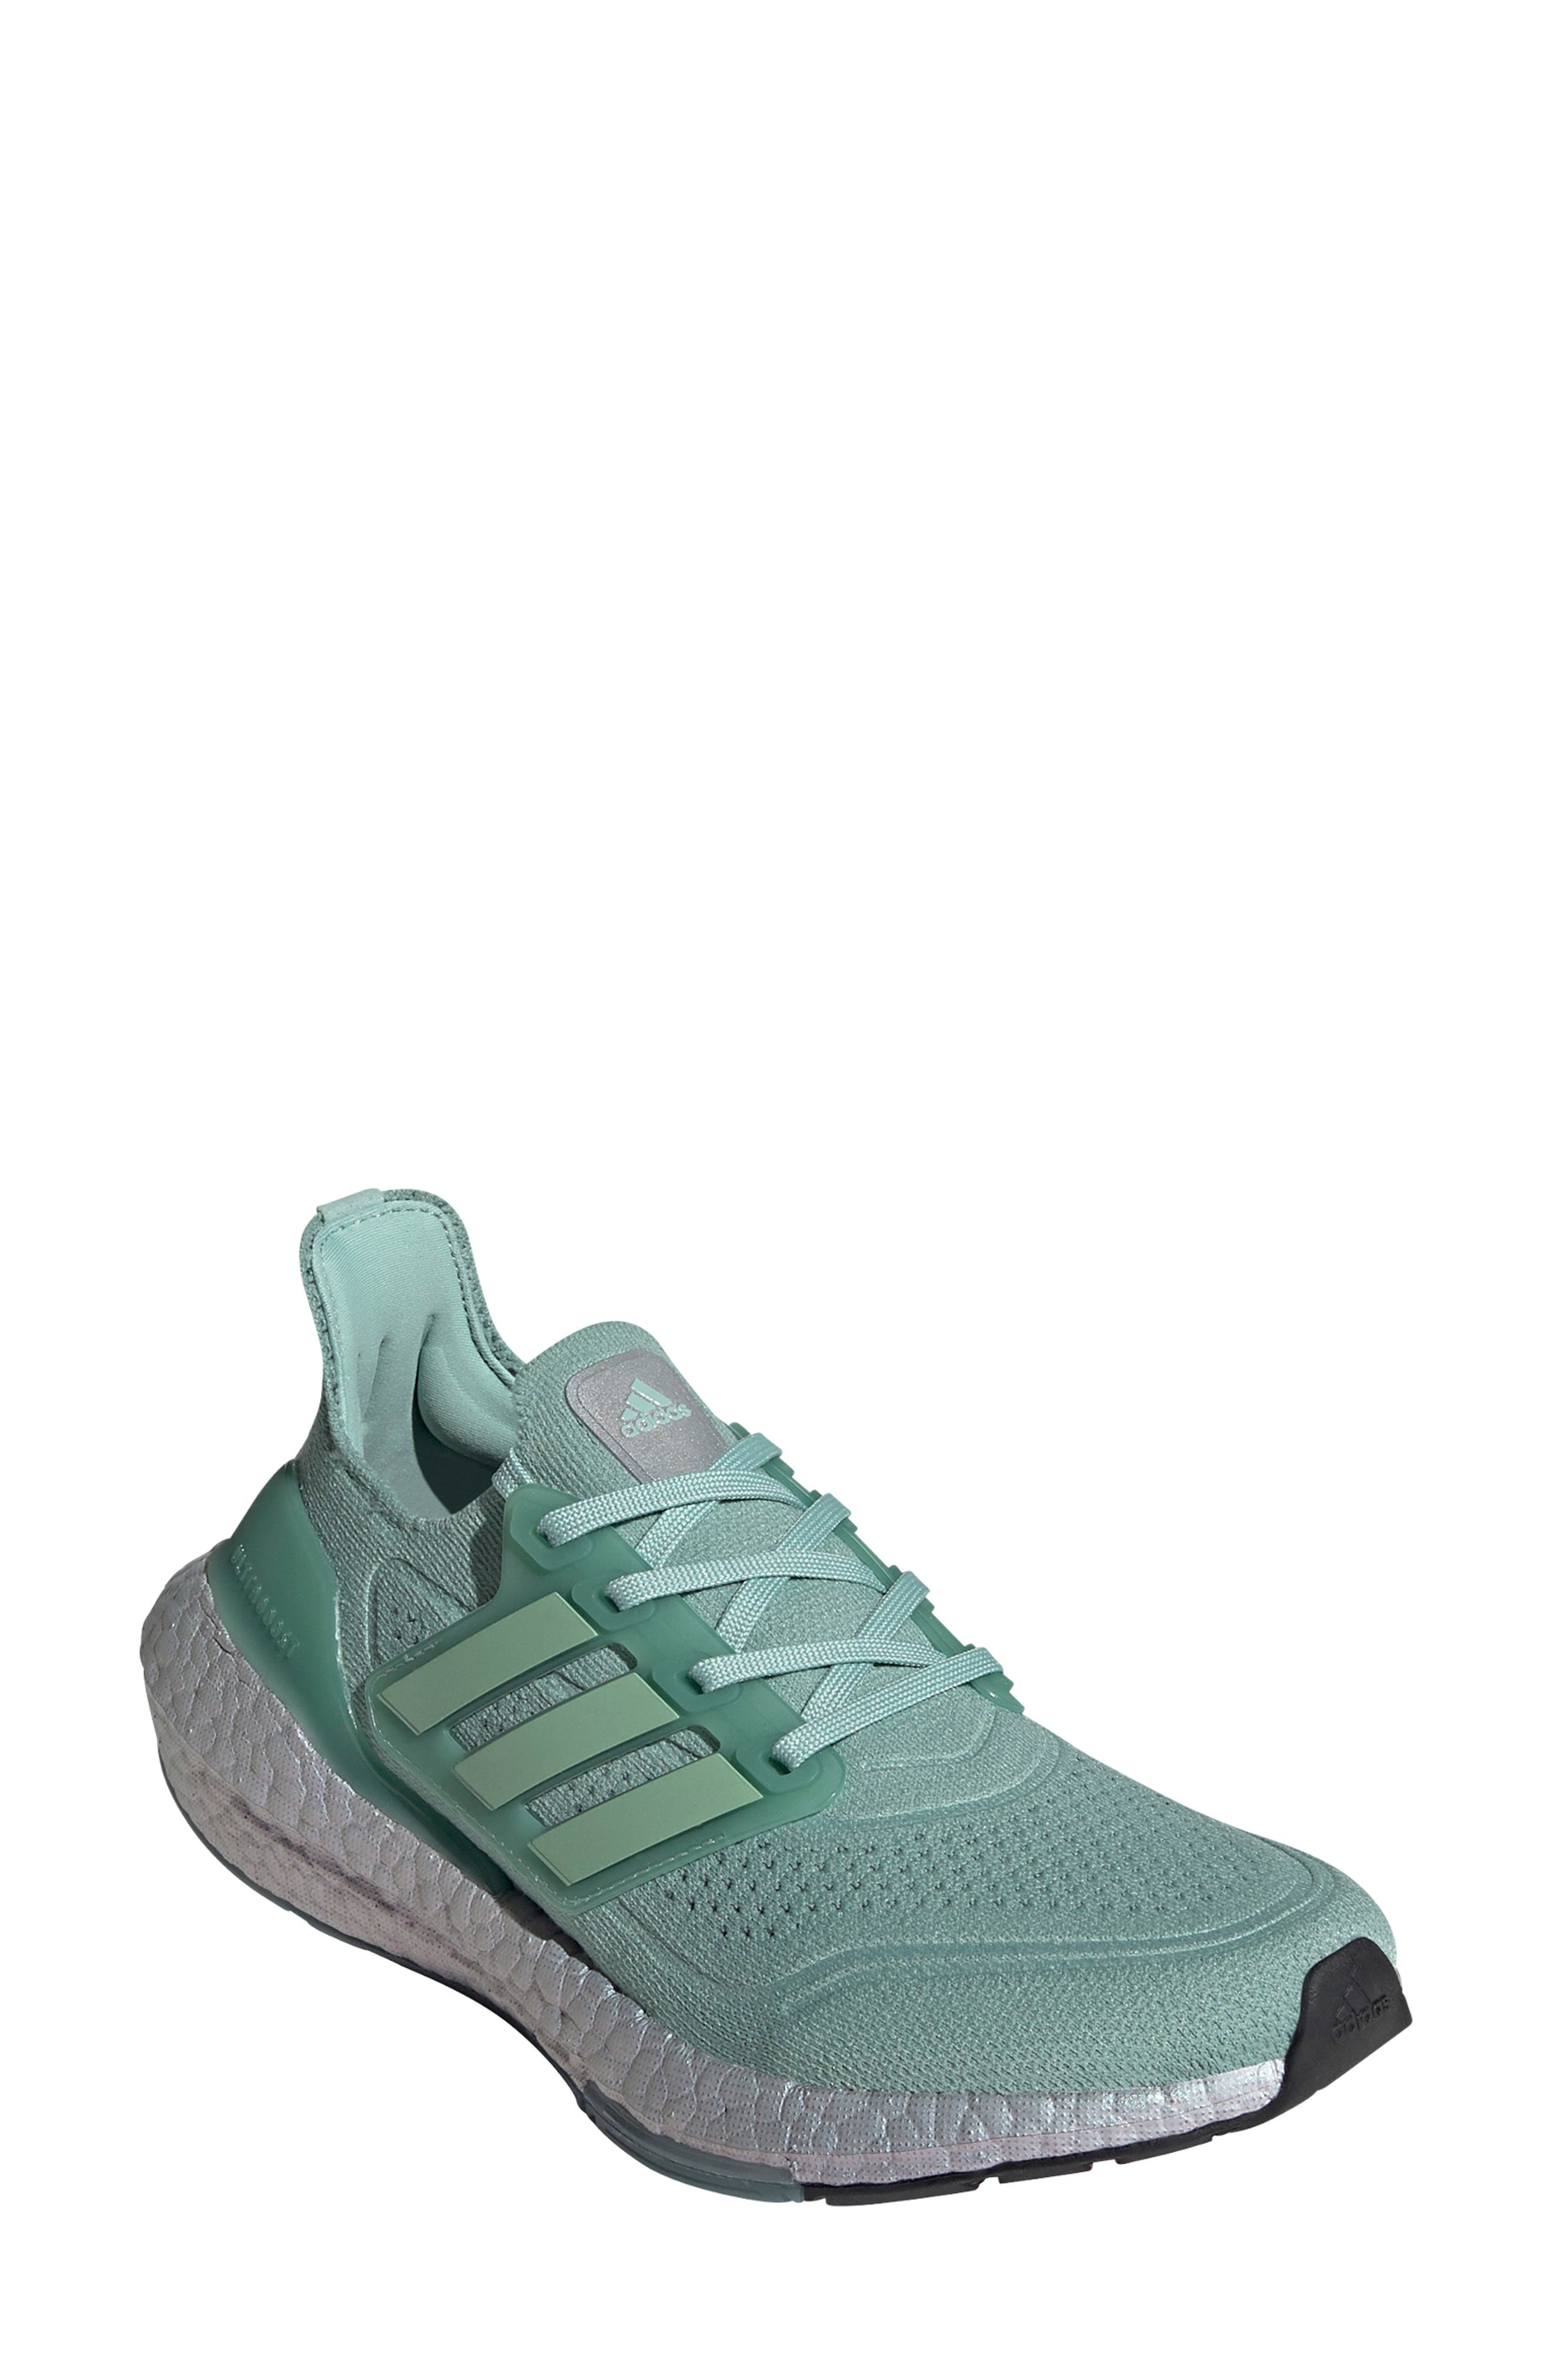 green athletic shoes